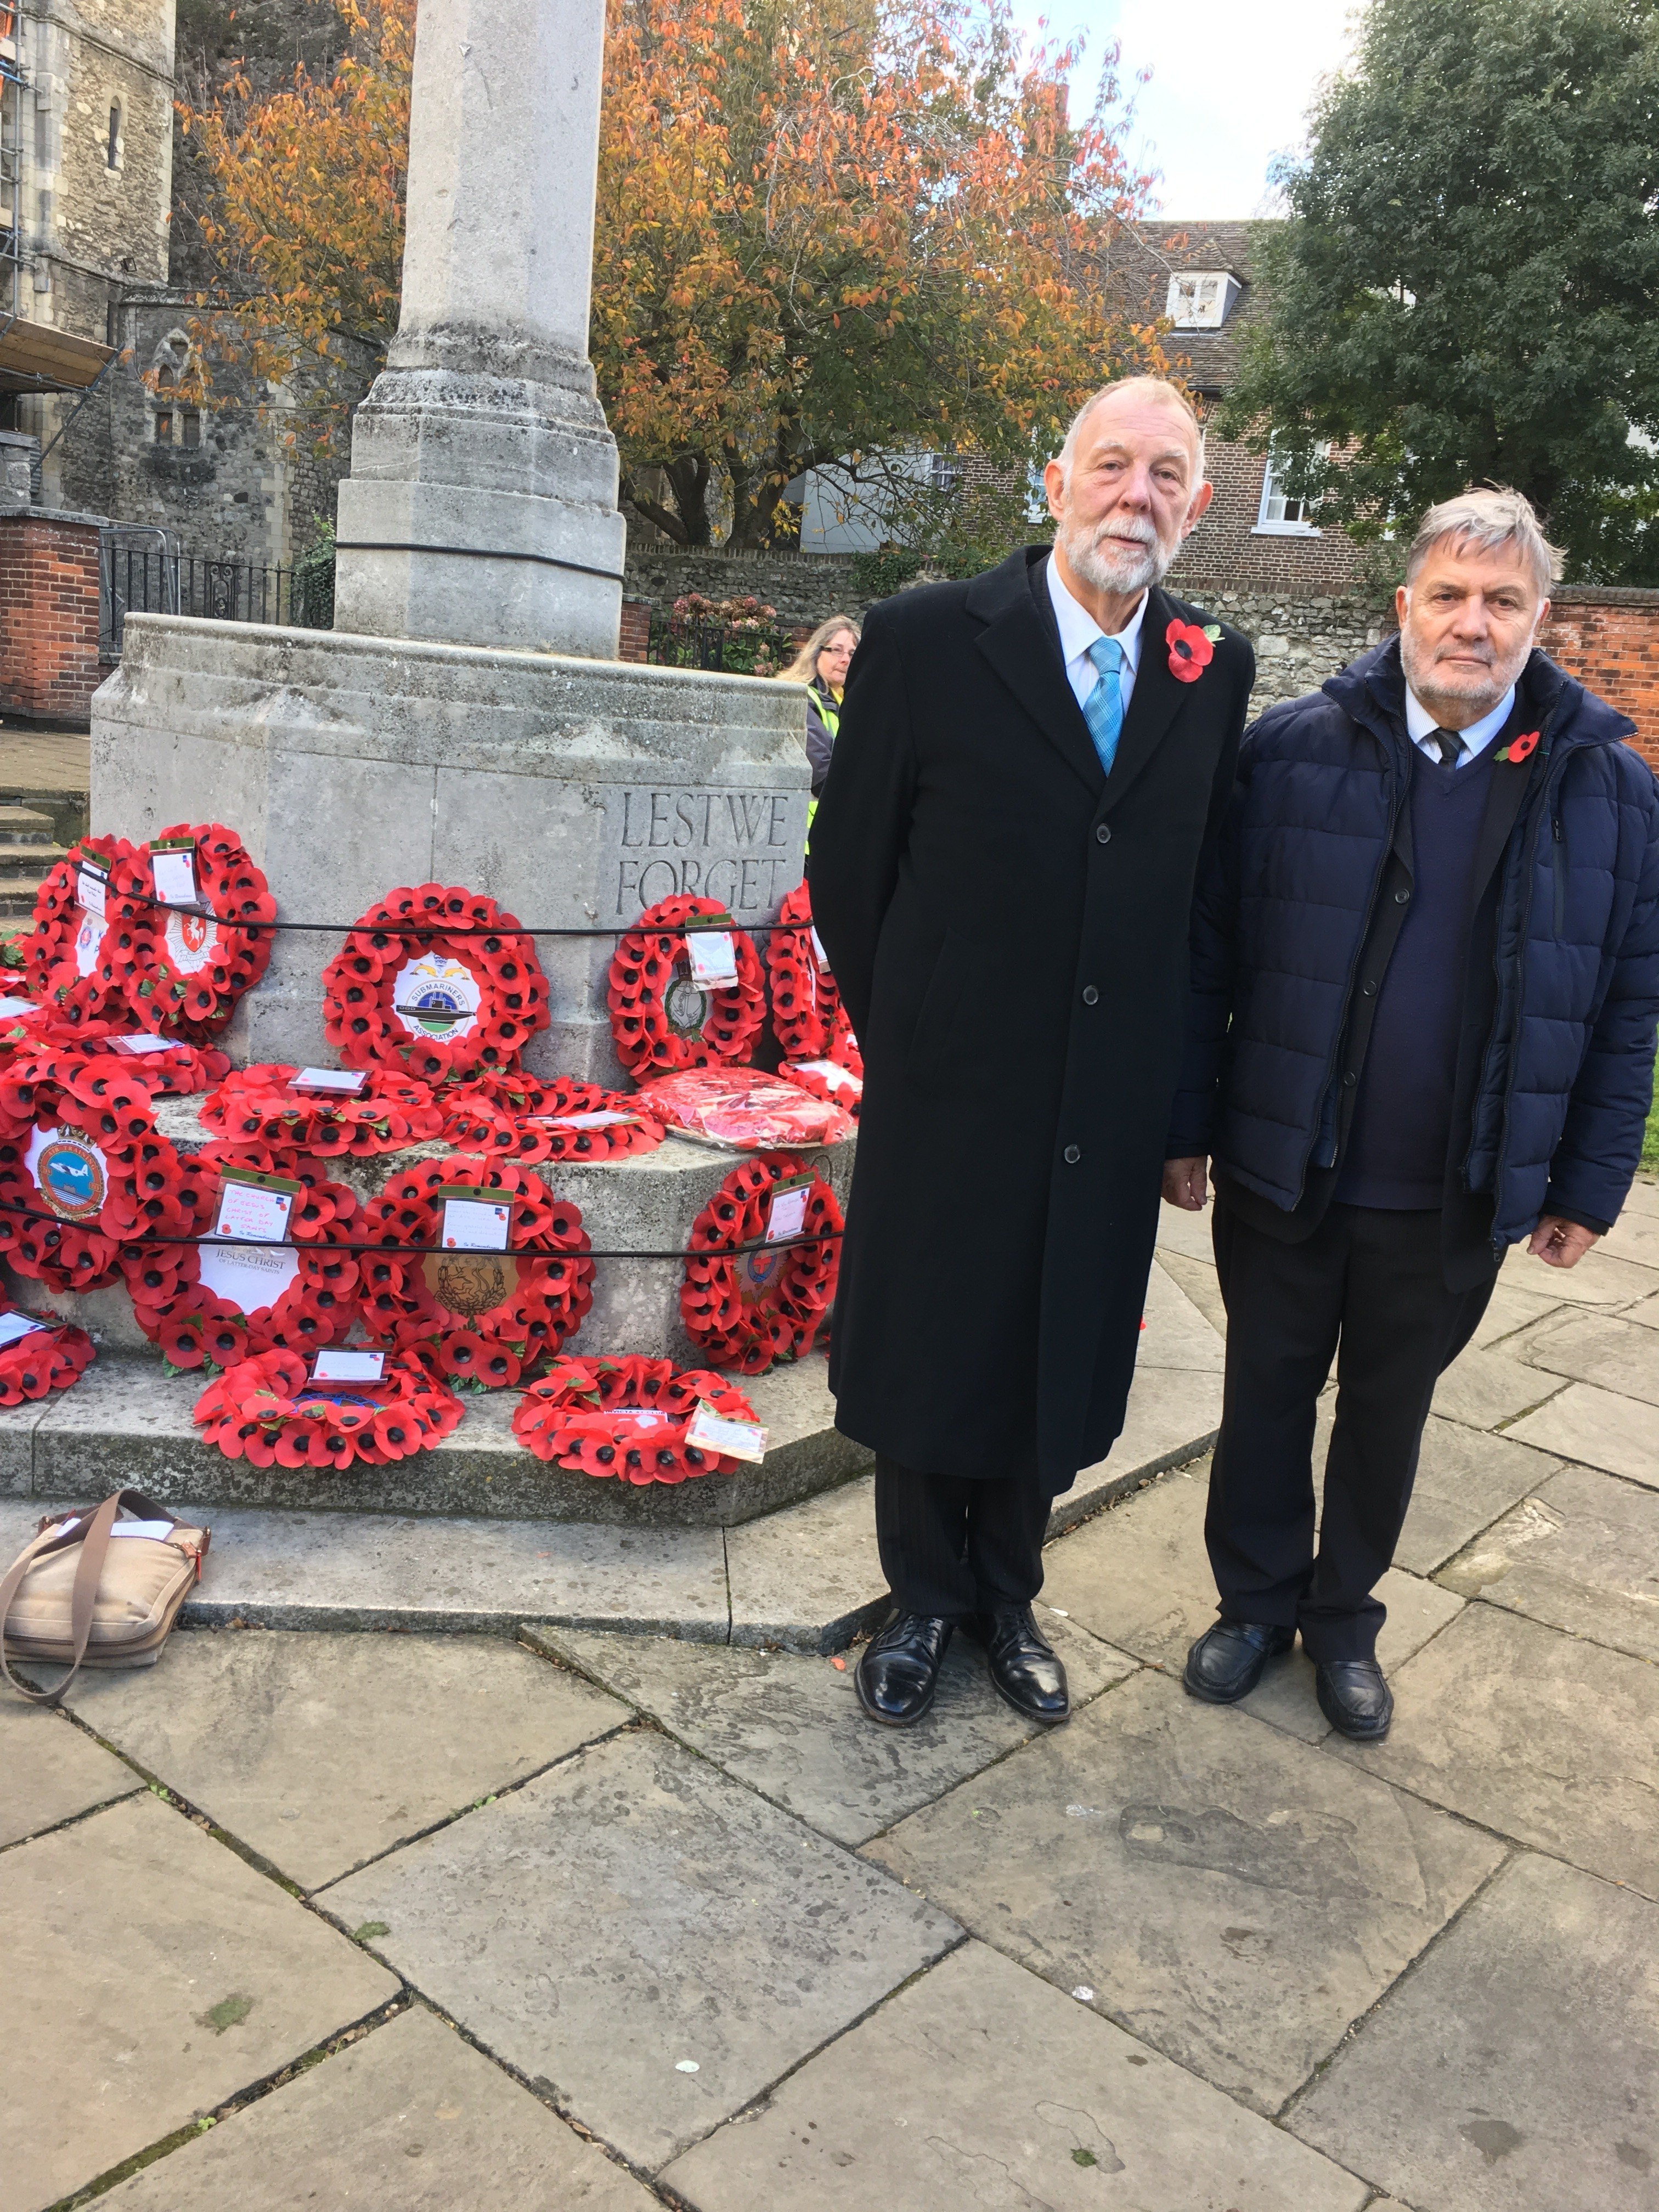 Councillors Williams and Etheridge on Remembrance Day